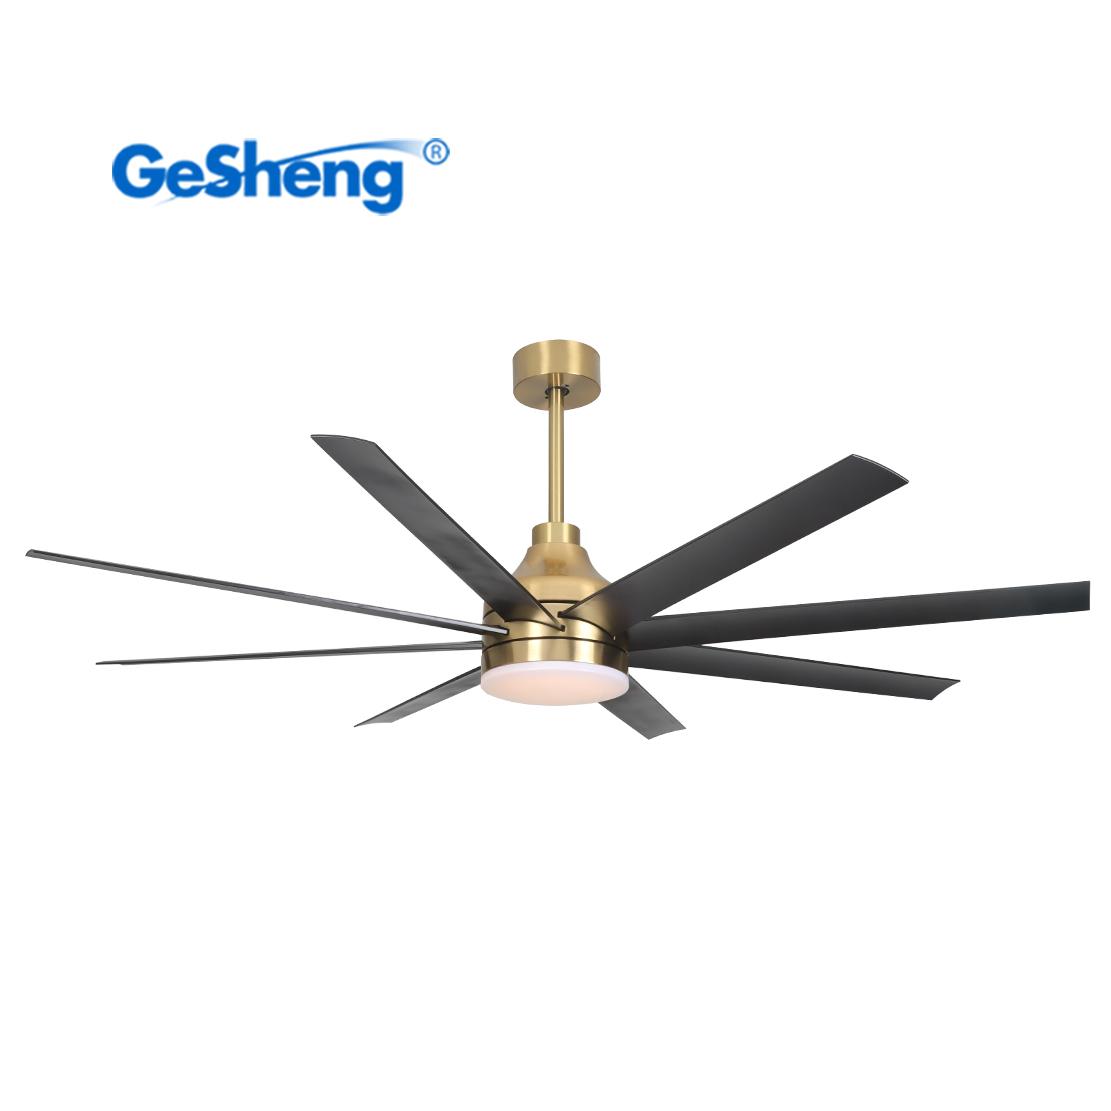 60 inch ceiling fan with lights nordic decorative modern fan ceil living room ceiling light with fan